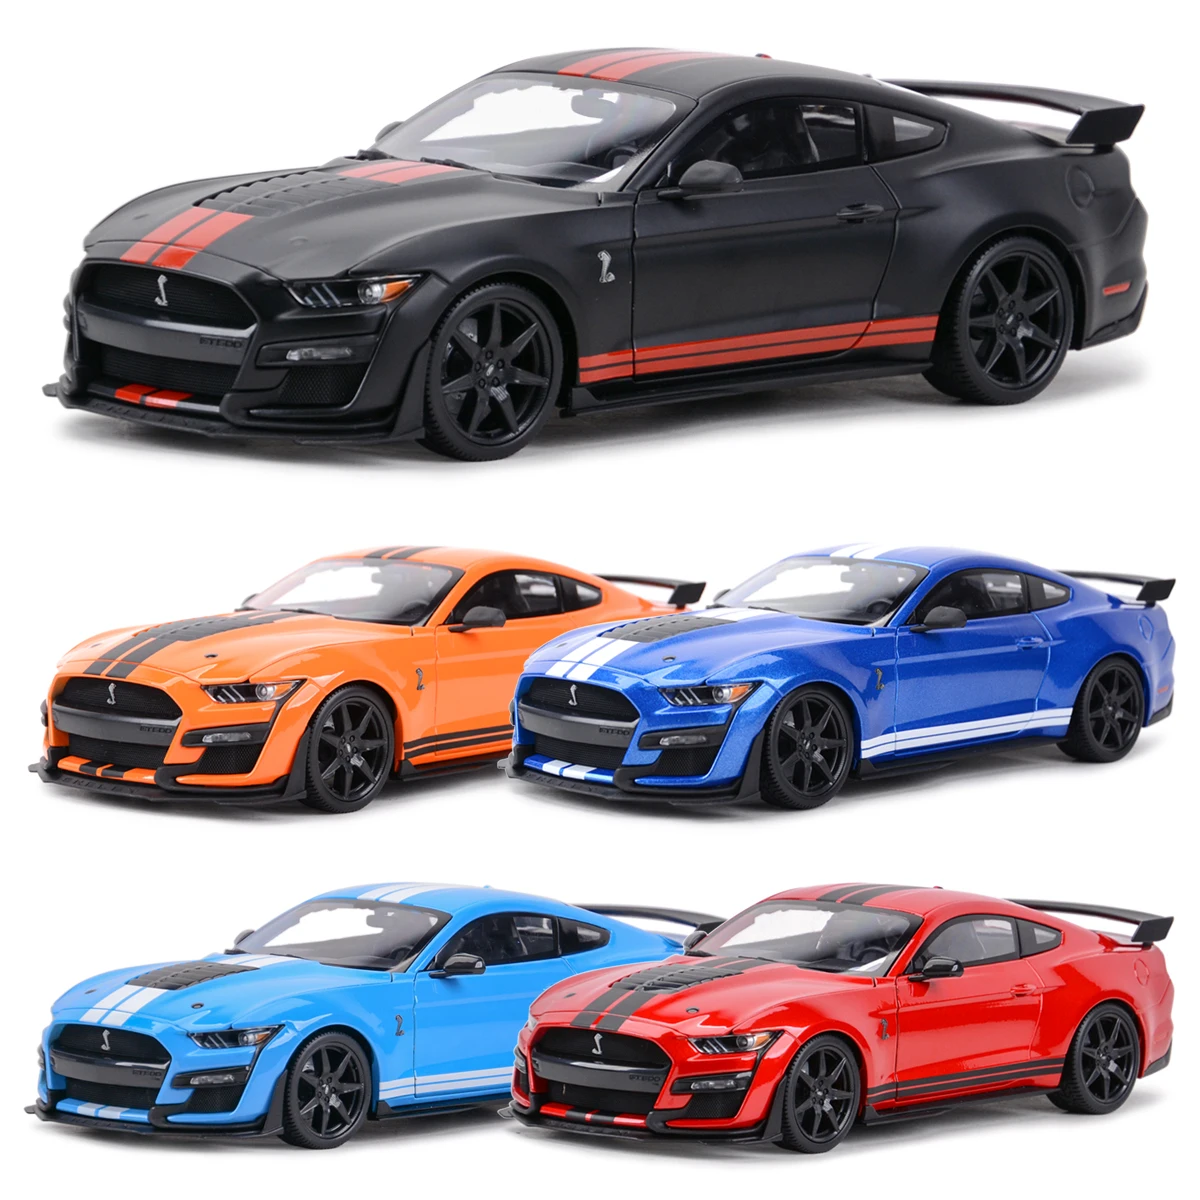 

2021 New Maisto 1:18 2020 Mustang Shelby GT500 Ford Sports Car Static Die Cast Vehicles Collectible Model Car Toys